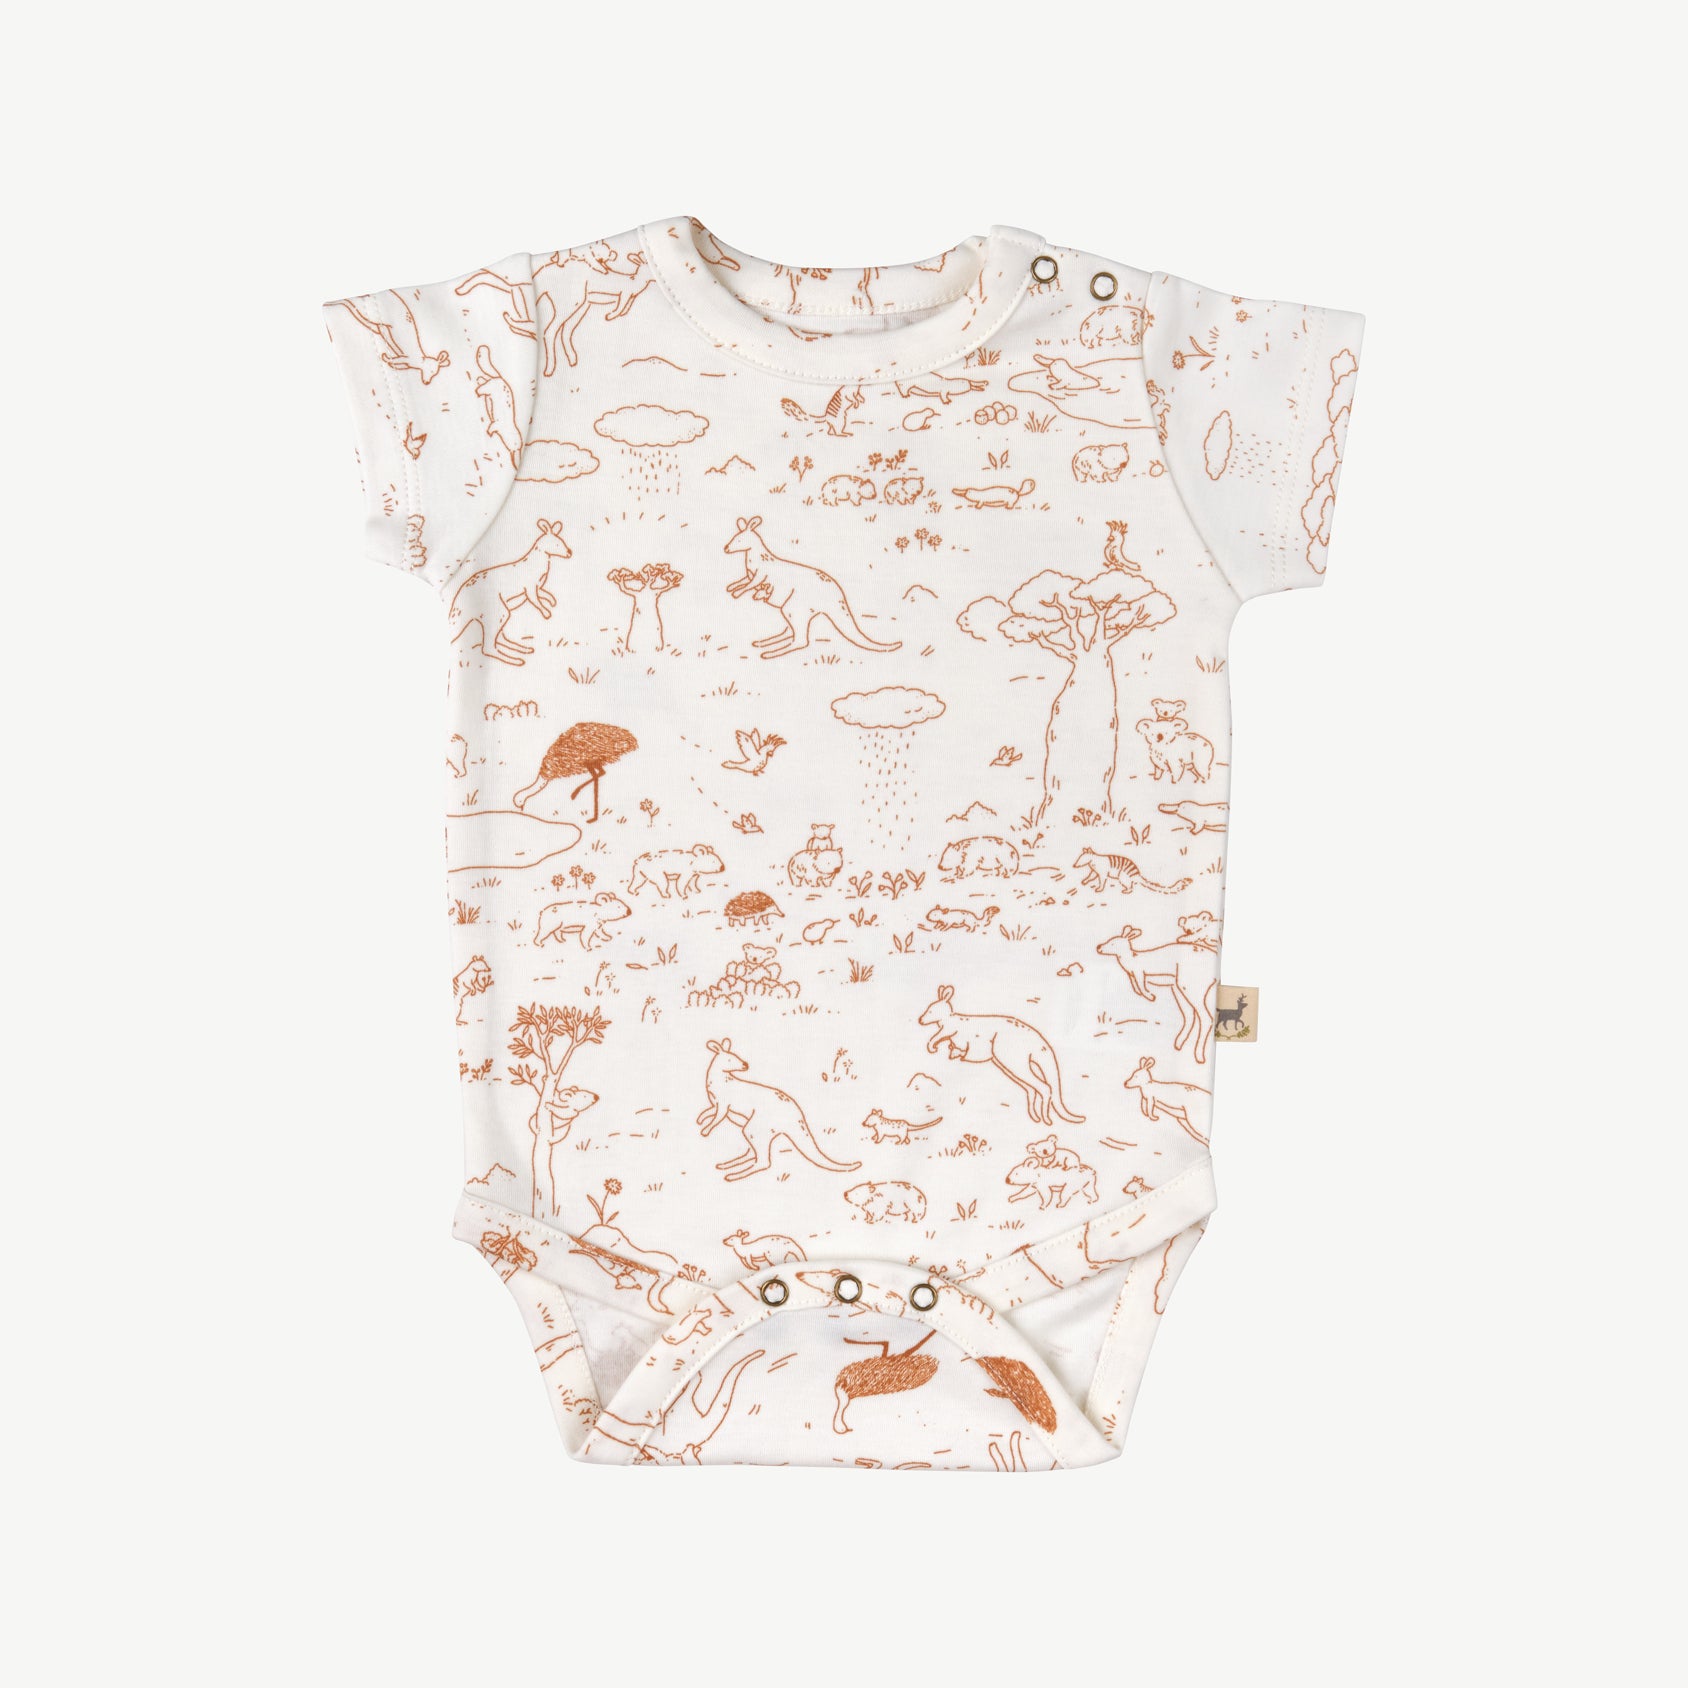 'footprints in the outback' ivory onesie + pants baby outfit